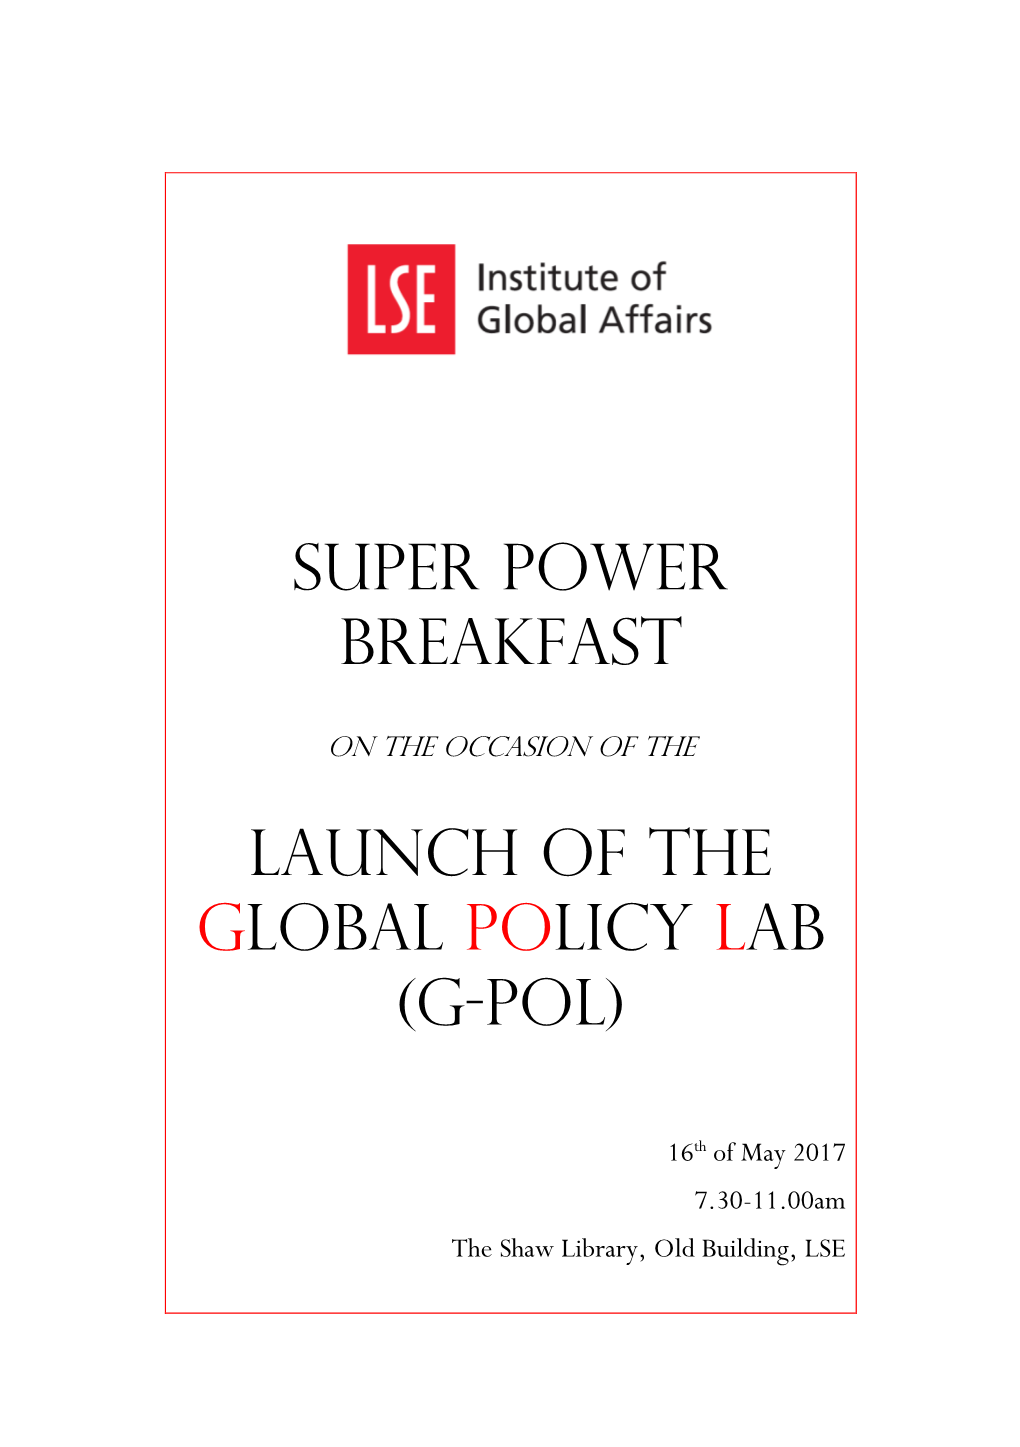 LSE Global Policy Lab Agenda